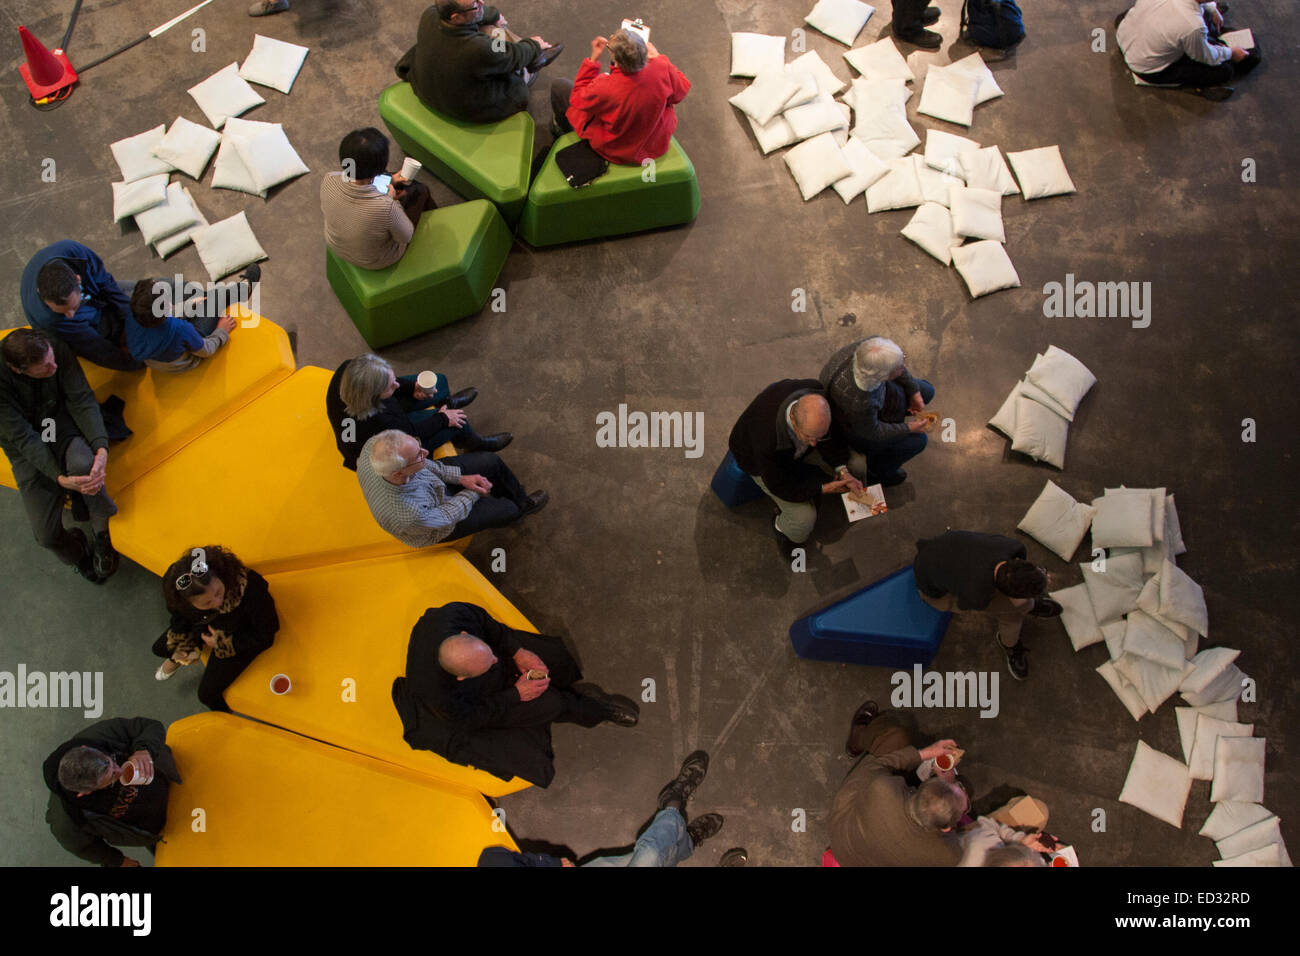 Looking down onto the crowd at The University Art Museum in Berkeley, California. Stock Photo